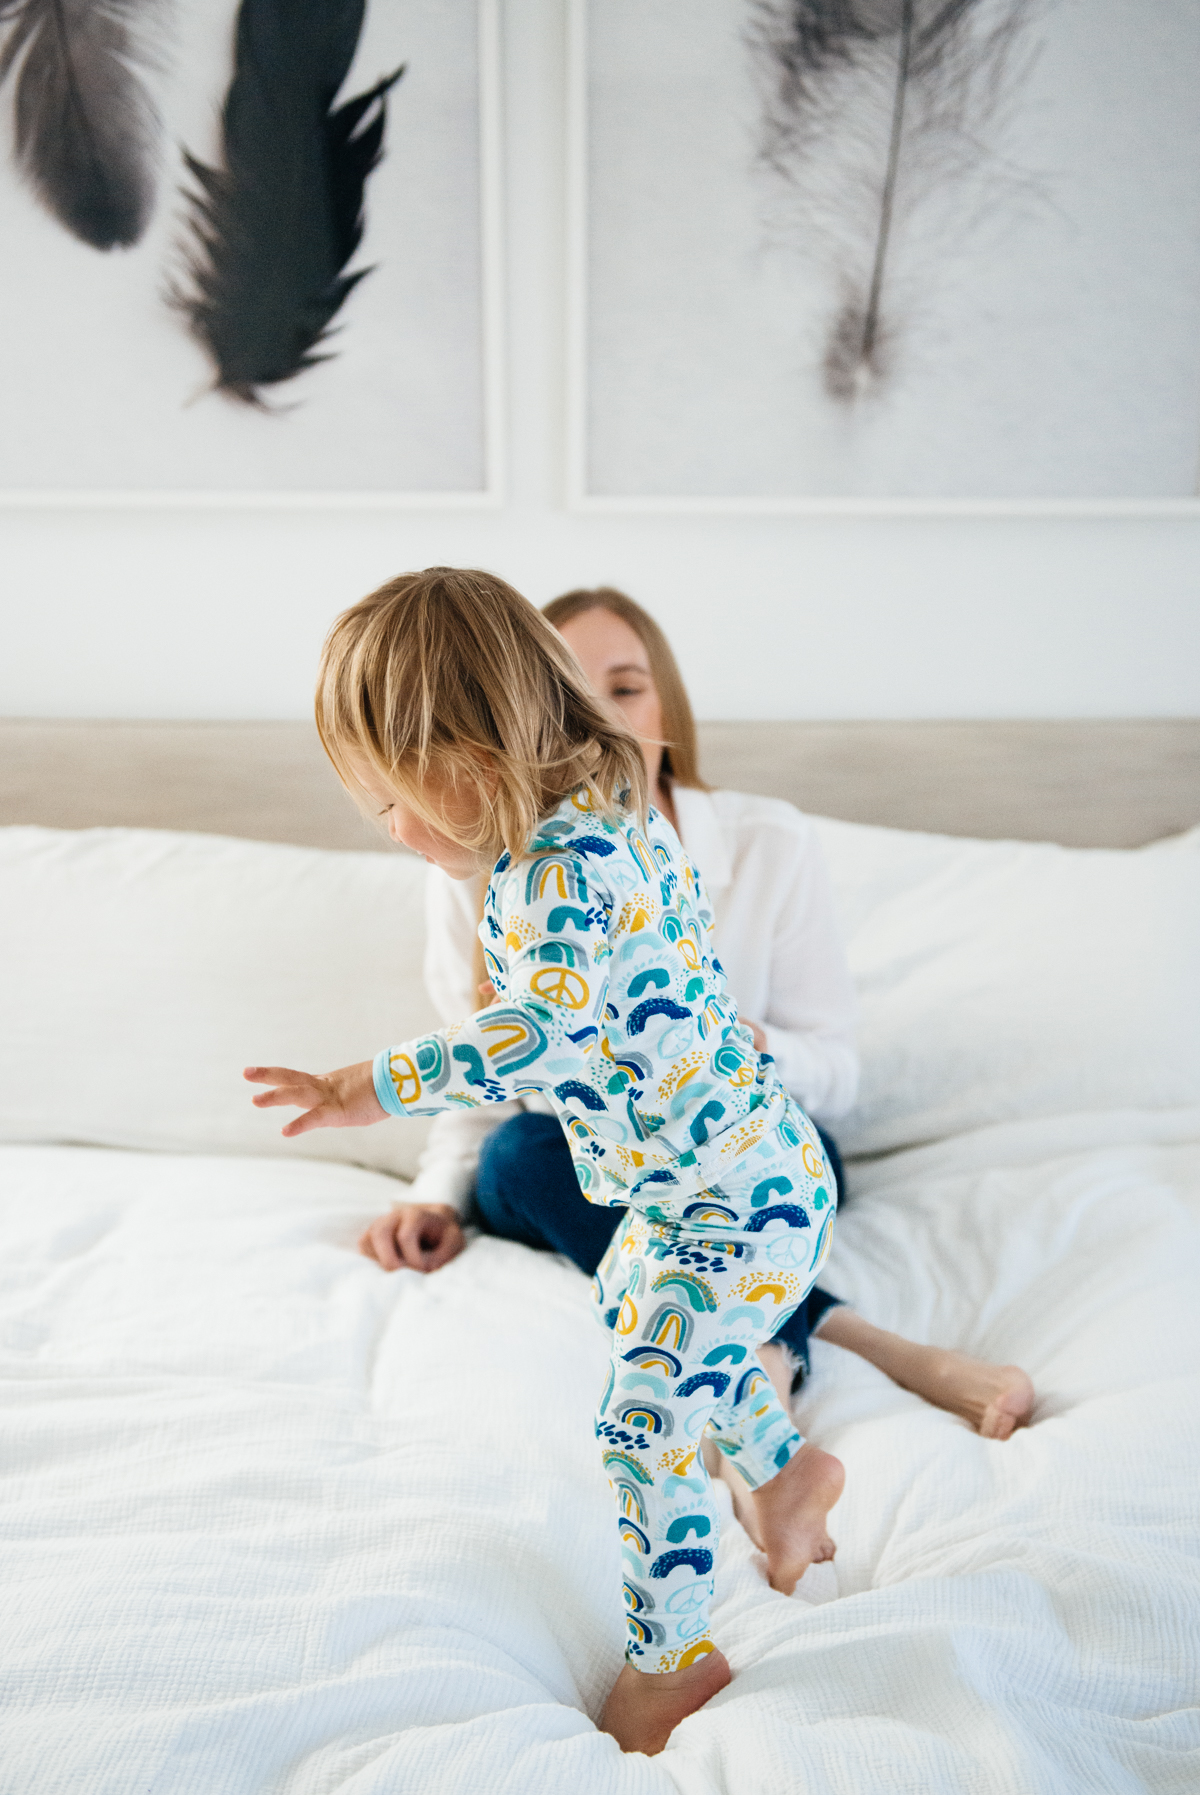 Kimberly Lapides of eatsleepwear in collaboration with Clover Baby & Kids pajamas celebrating Rainbow Baby, IVF, and Infertility